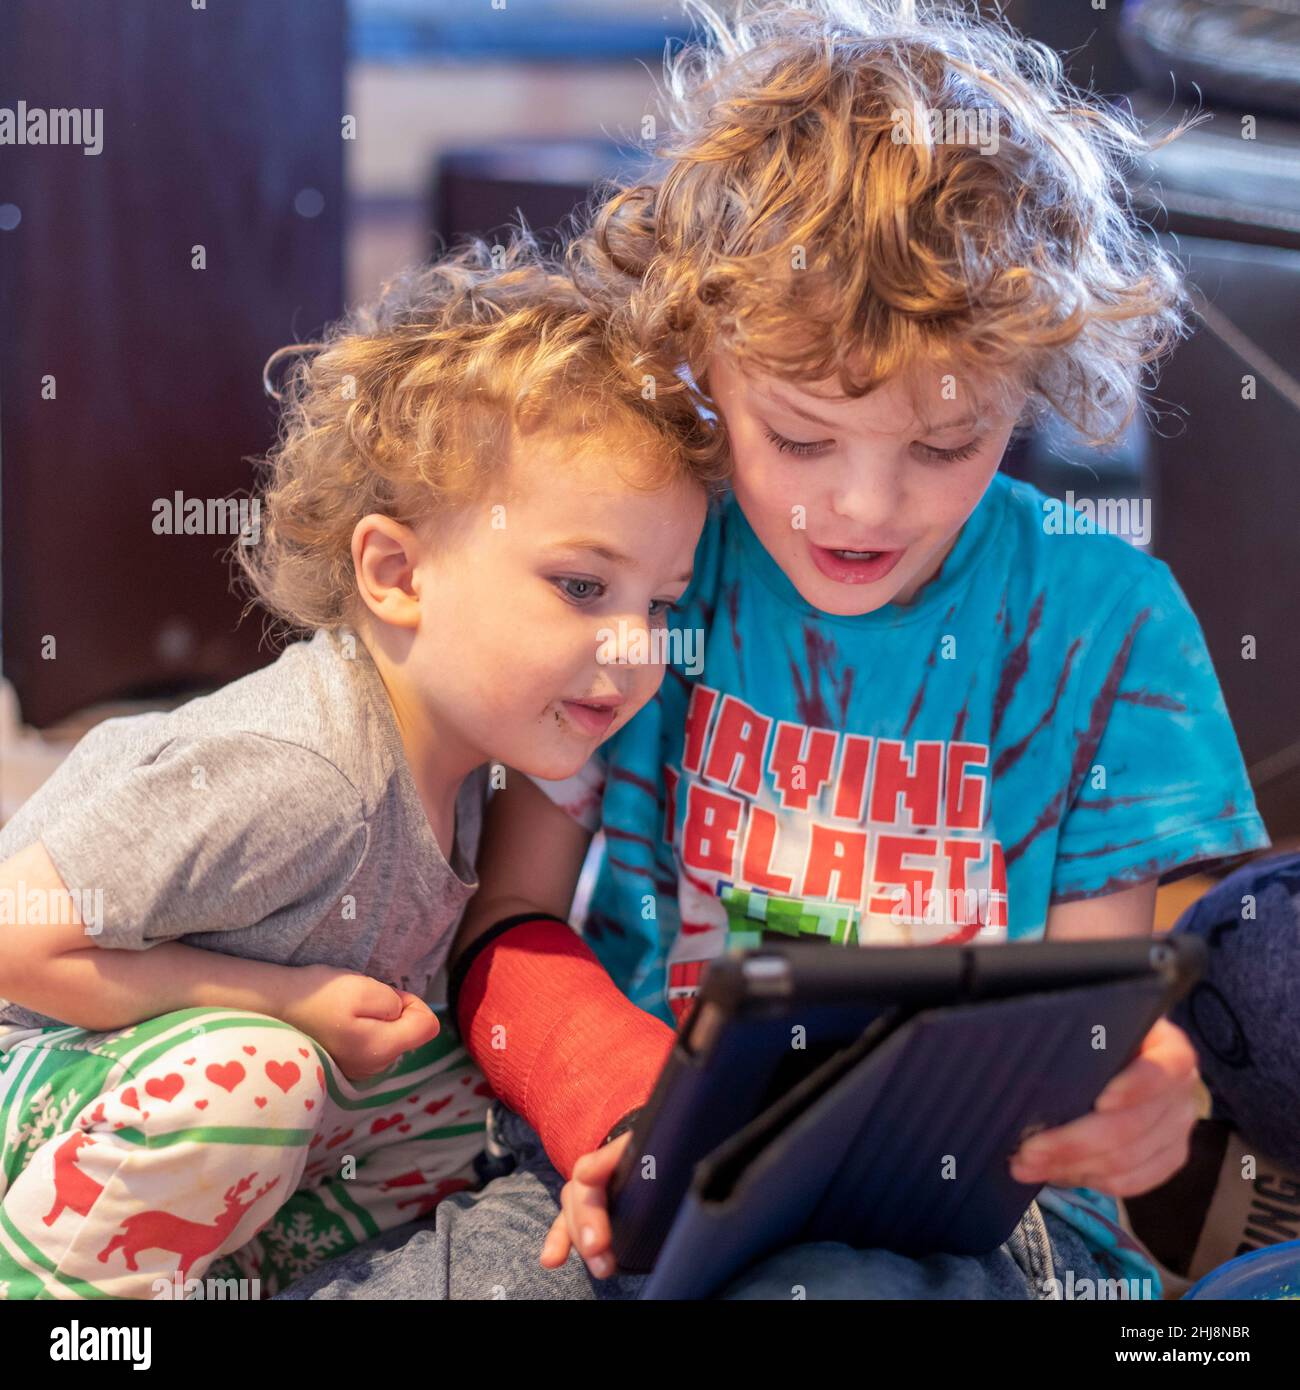 Adam Hjermstad Jr., 7 (right), and his brother Hendrix Hjermstad, 3, look at content on an iPad. Stock Photo